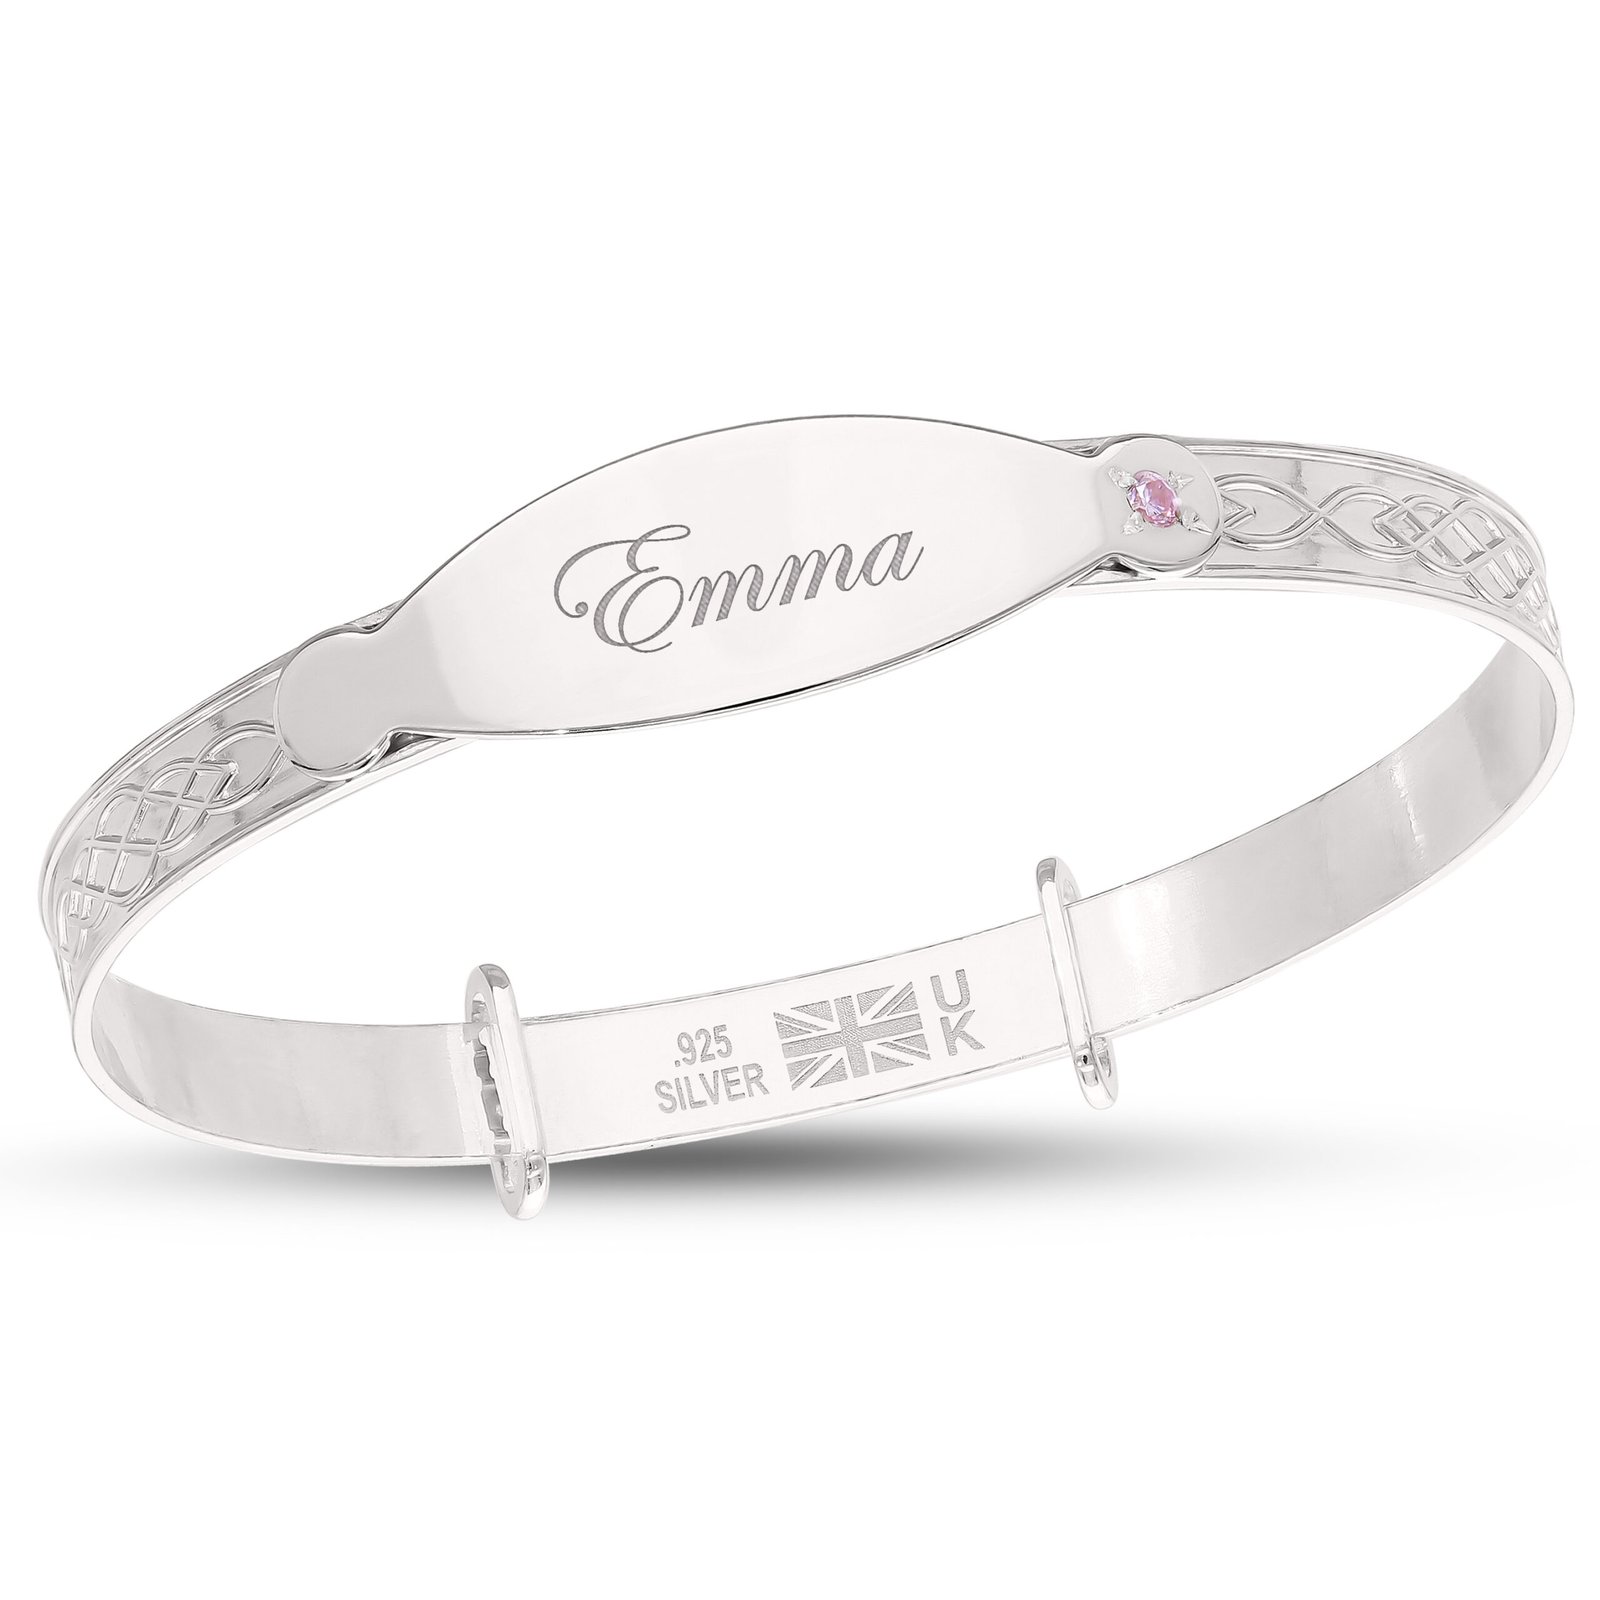 Befada Custom Bracelet, Name Date Engraving Personalized Bracelets,  Stainless Steel Nameplate ID Bracelets Jewelry for Women Girl Birthday  Christmas, and holiday gifts : Amazon.co.uk: Fashion